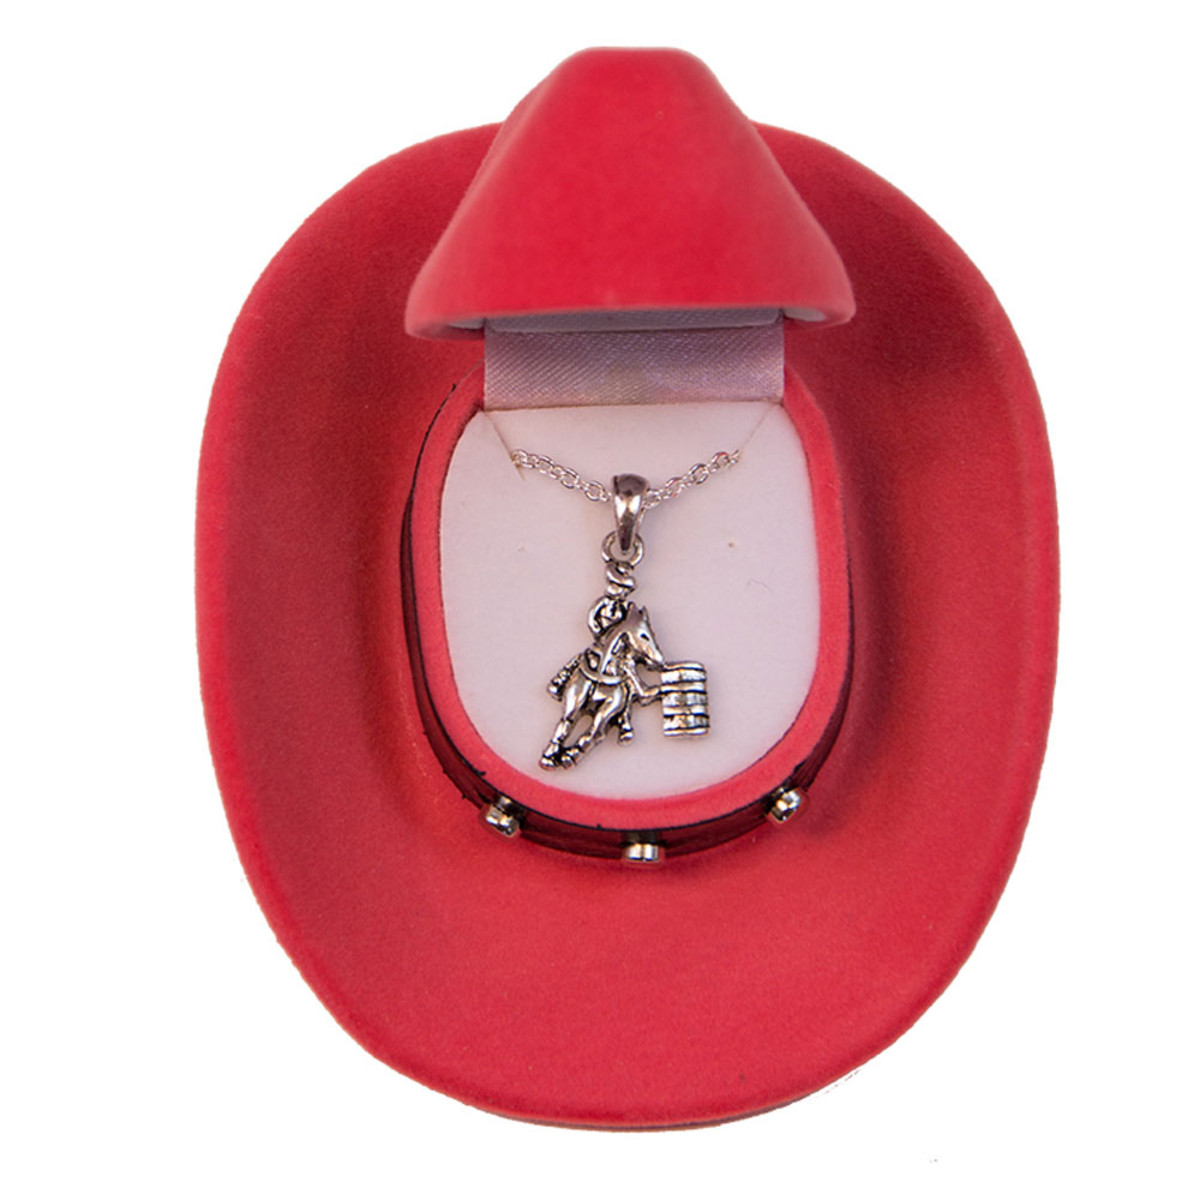 Barrel Racer with Barrel Necklace Silver Barrel Racing Horse Pendant in Cowboy Hat Red Cowgirl Hat